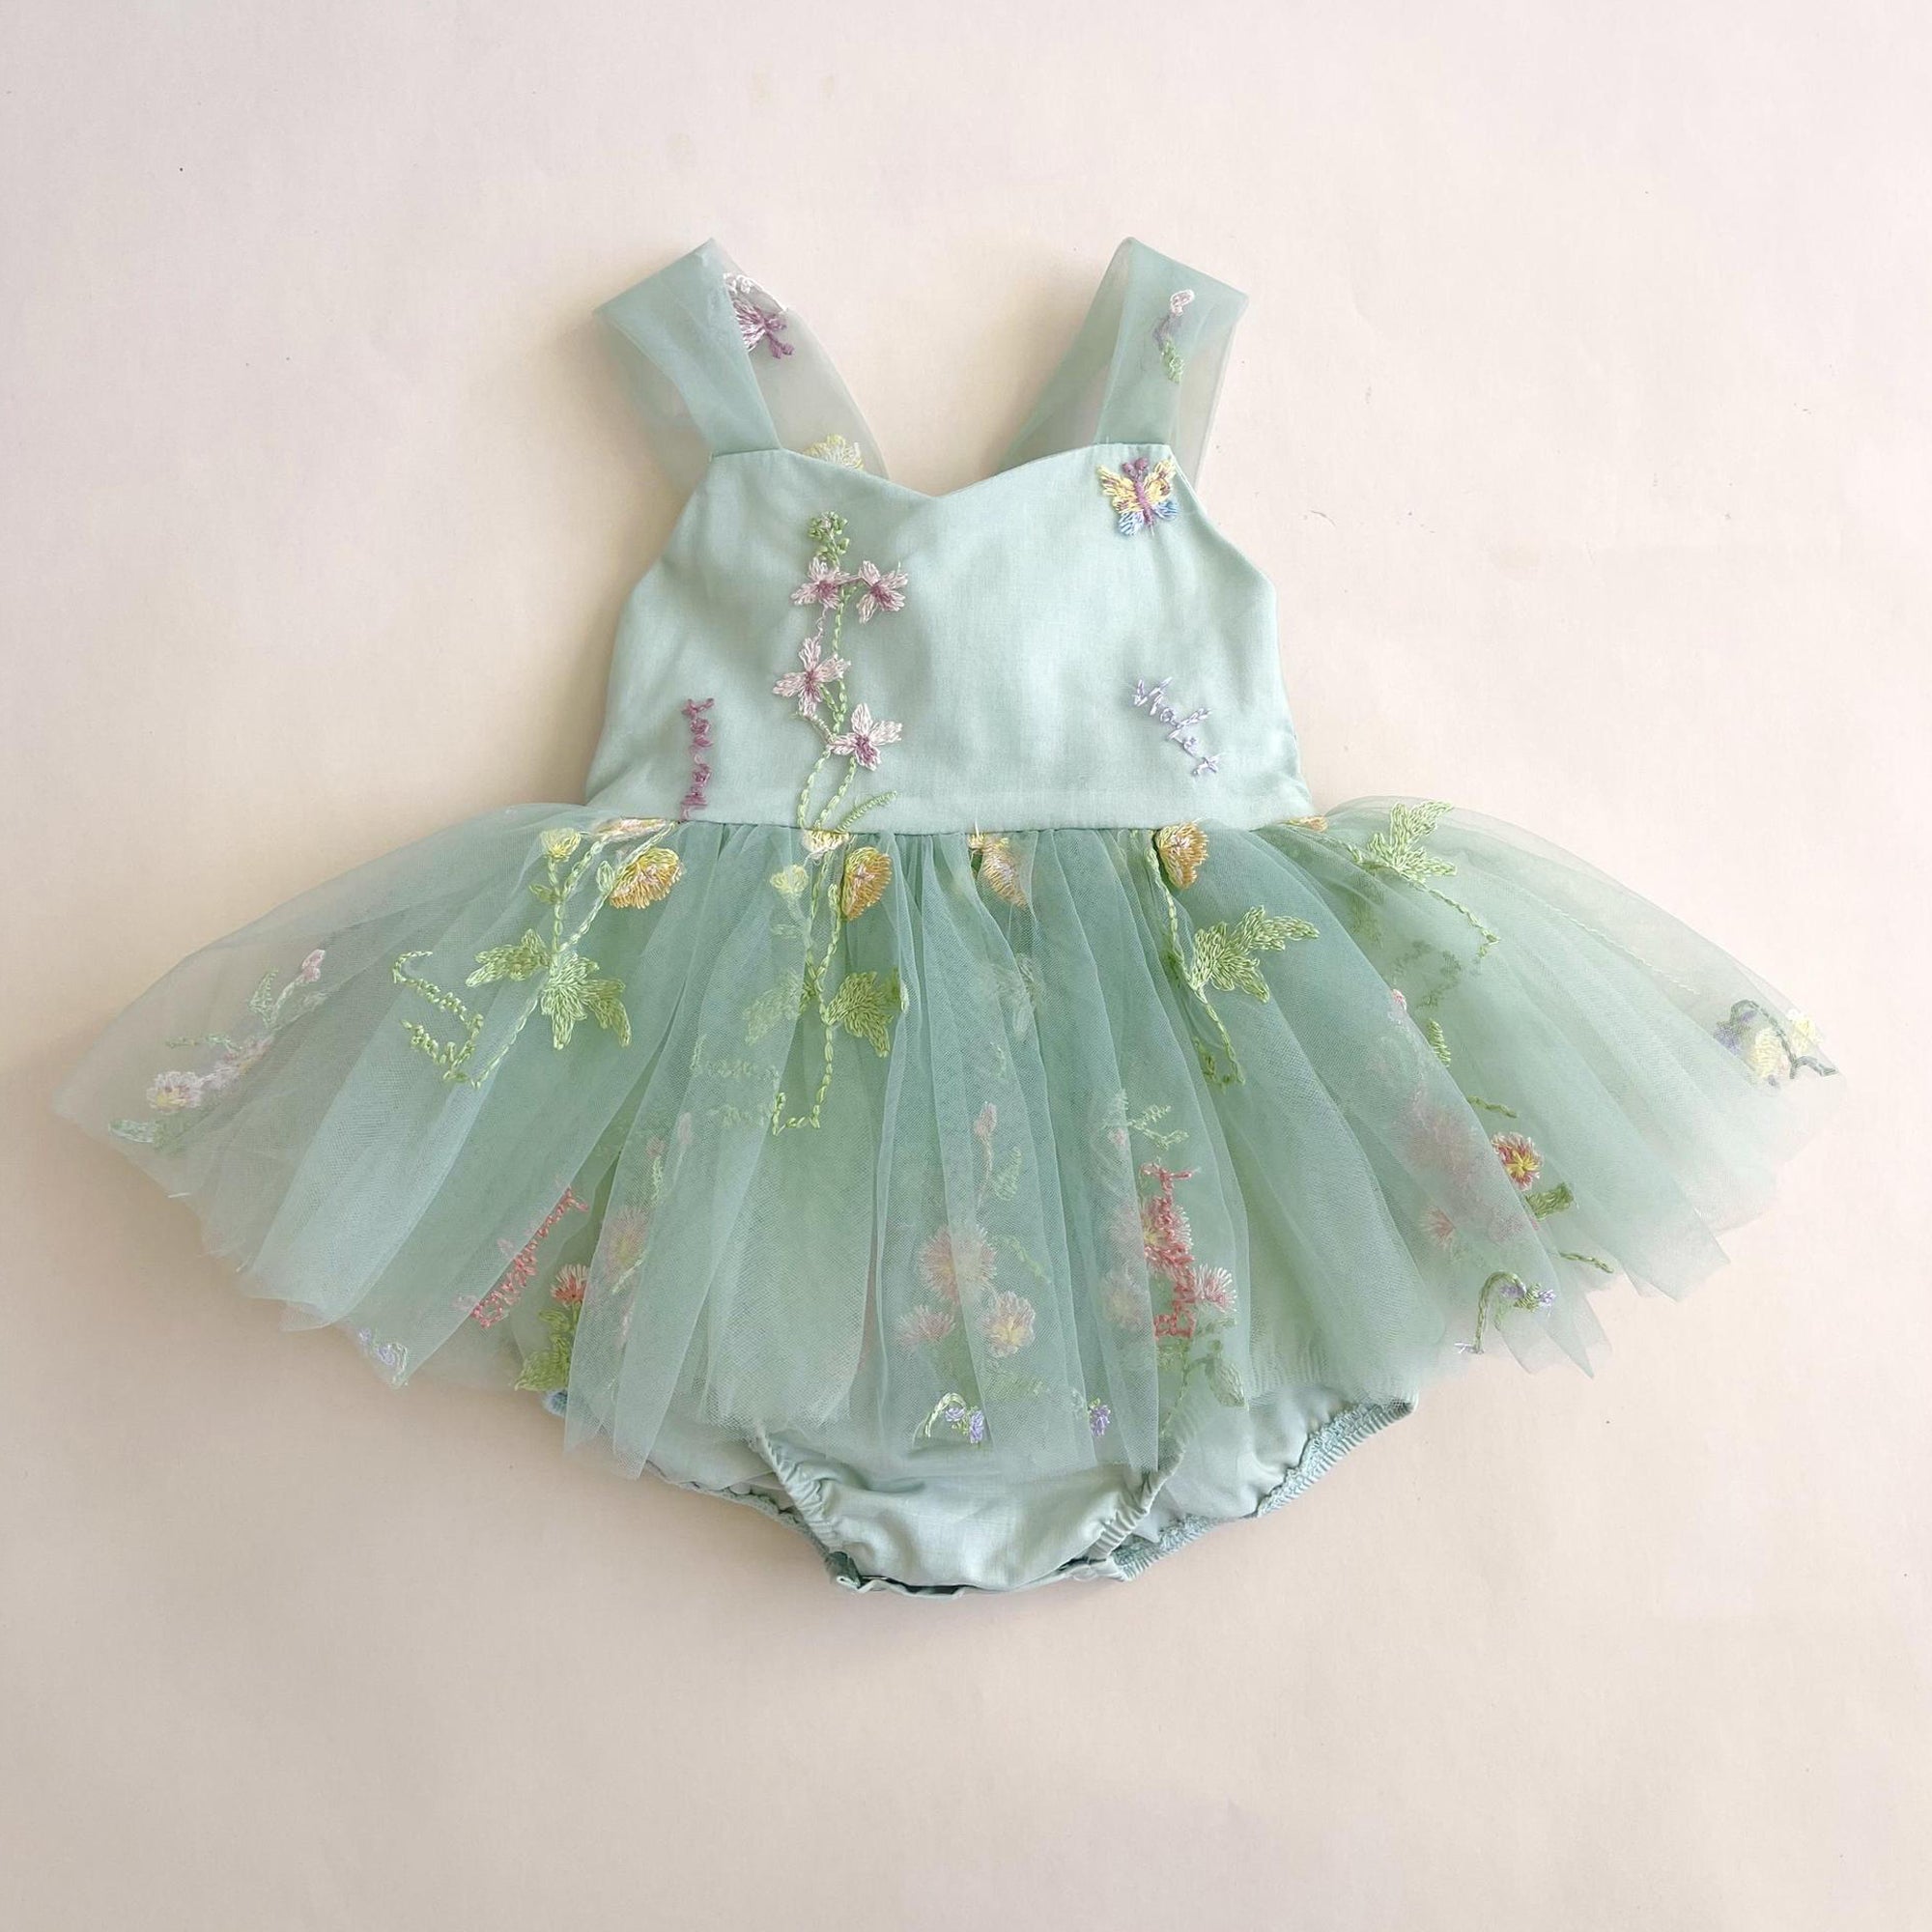 Pearls Lace Applique Flower Girl Dress Fashion Mother And Daughter Dresses  Matching V Neck Baby Wedding Gowns From Newdeve, $69.95 | DHgate.Com